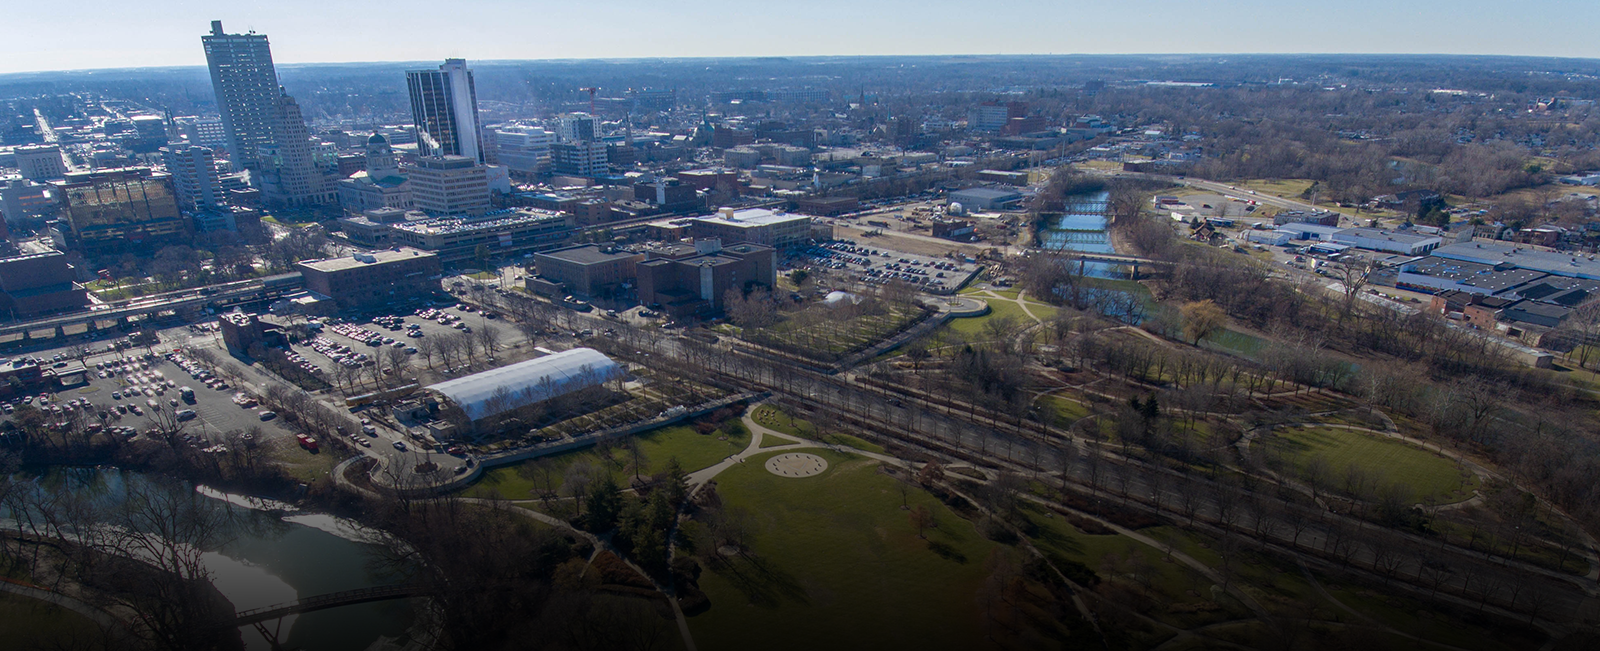 Fort Wayne Aerial & Drone Photography Services for Real Estate Listings and Construction Sites